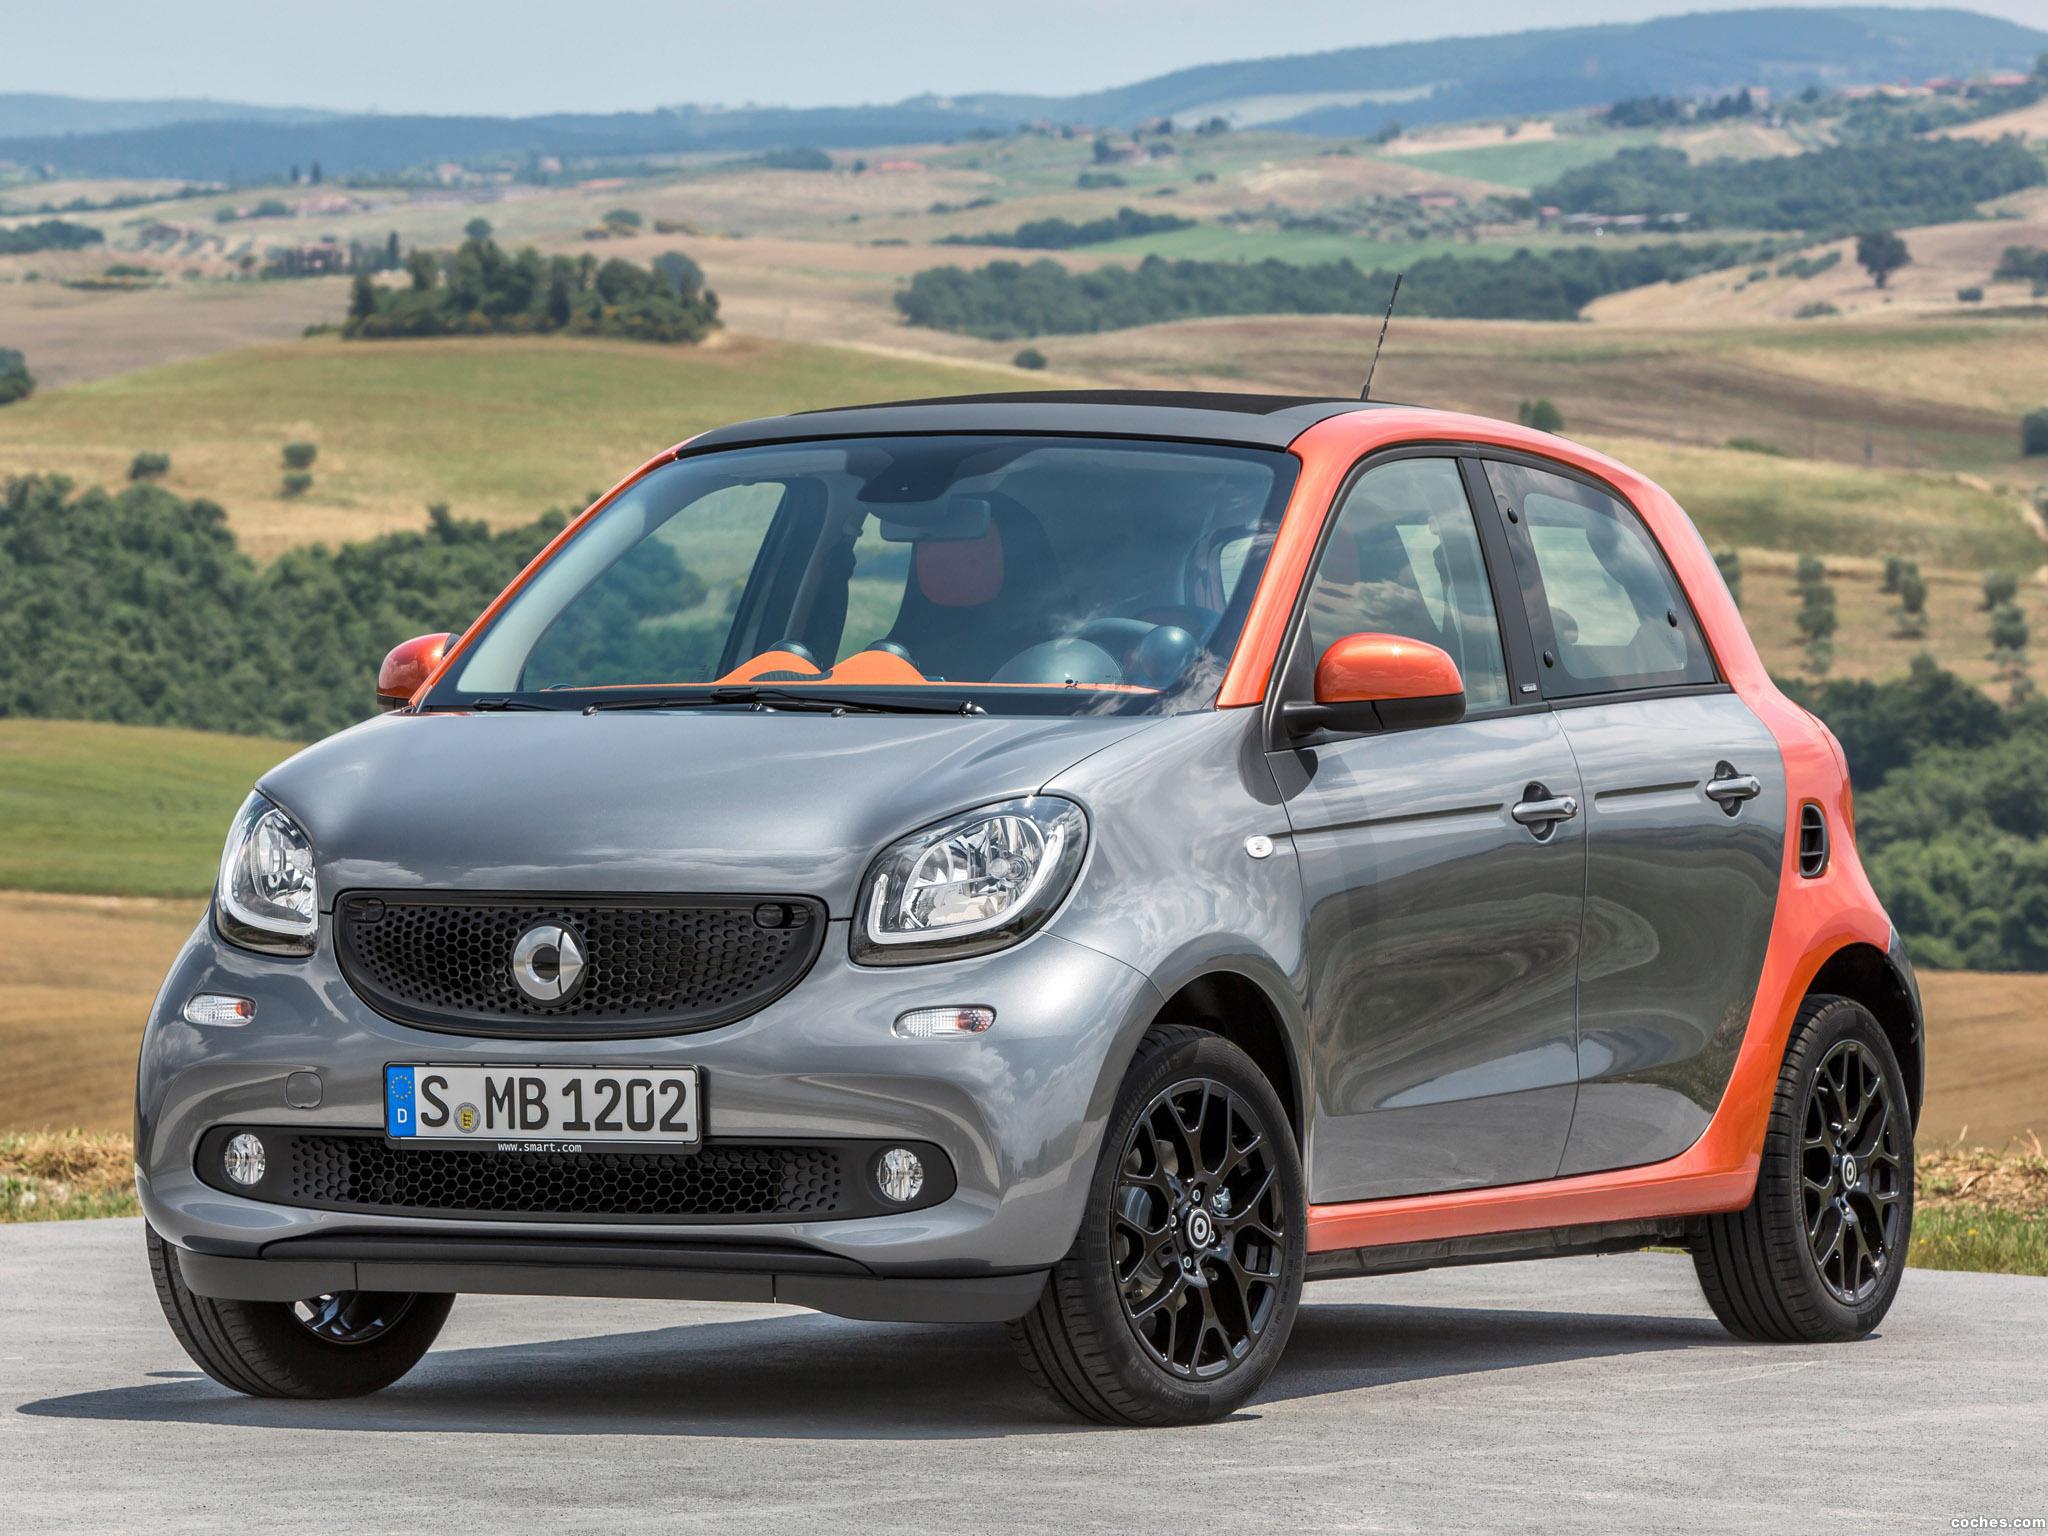 Smart. Smart Forfour II 2015. Мерседес смарт Форфоур. Smart Forfour w453. Мерседес Smart Forfour.